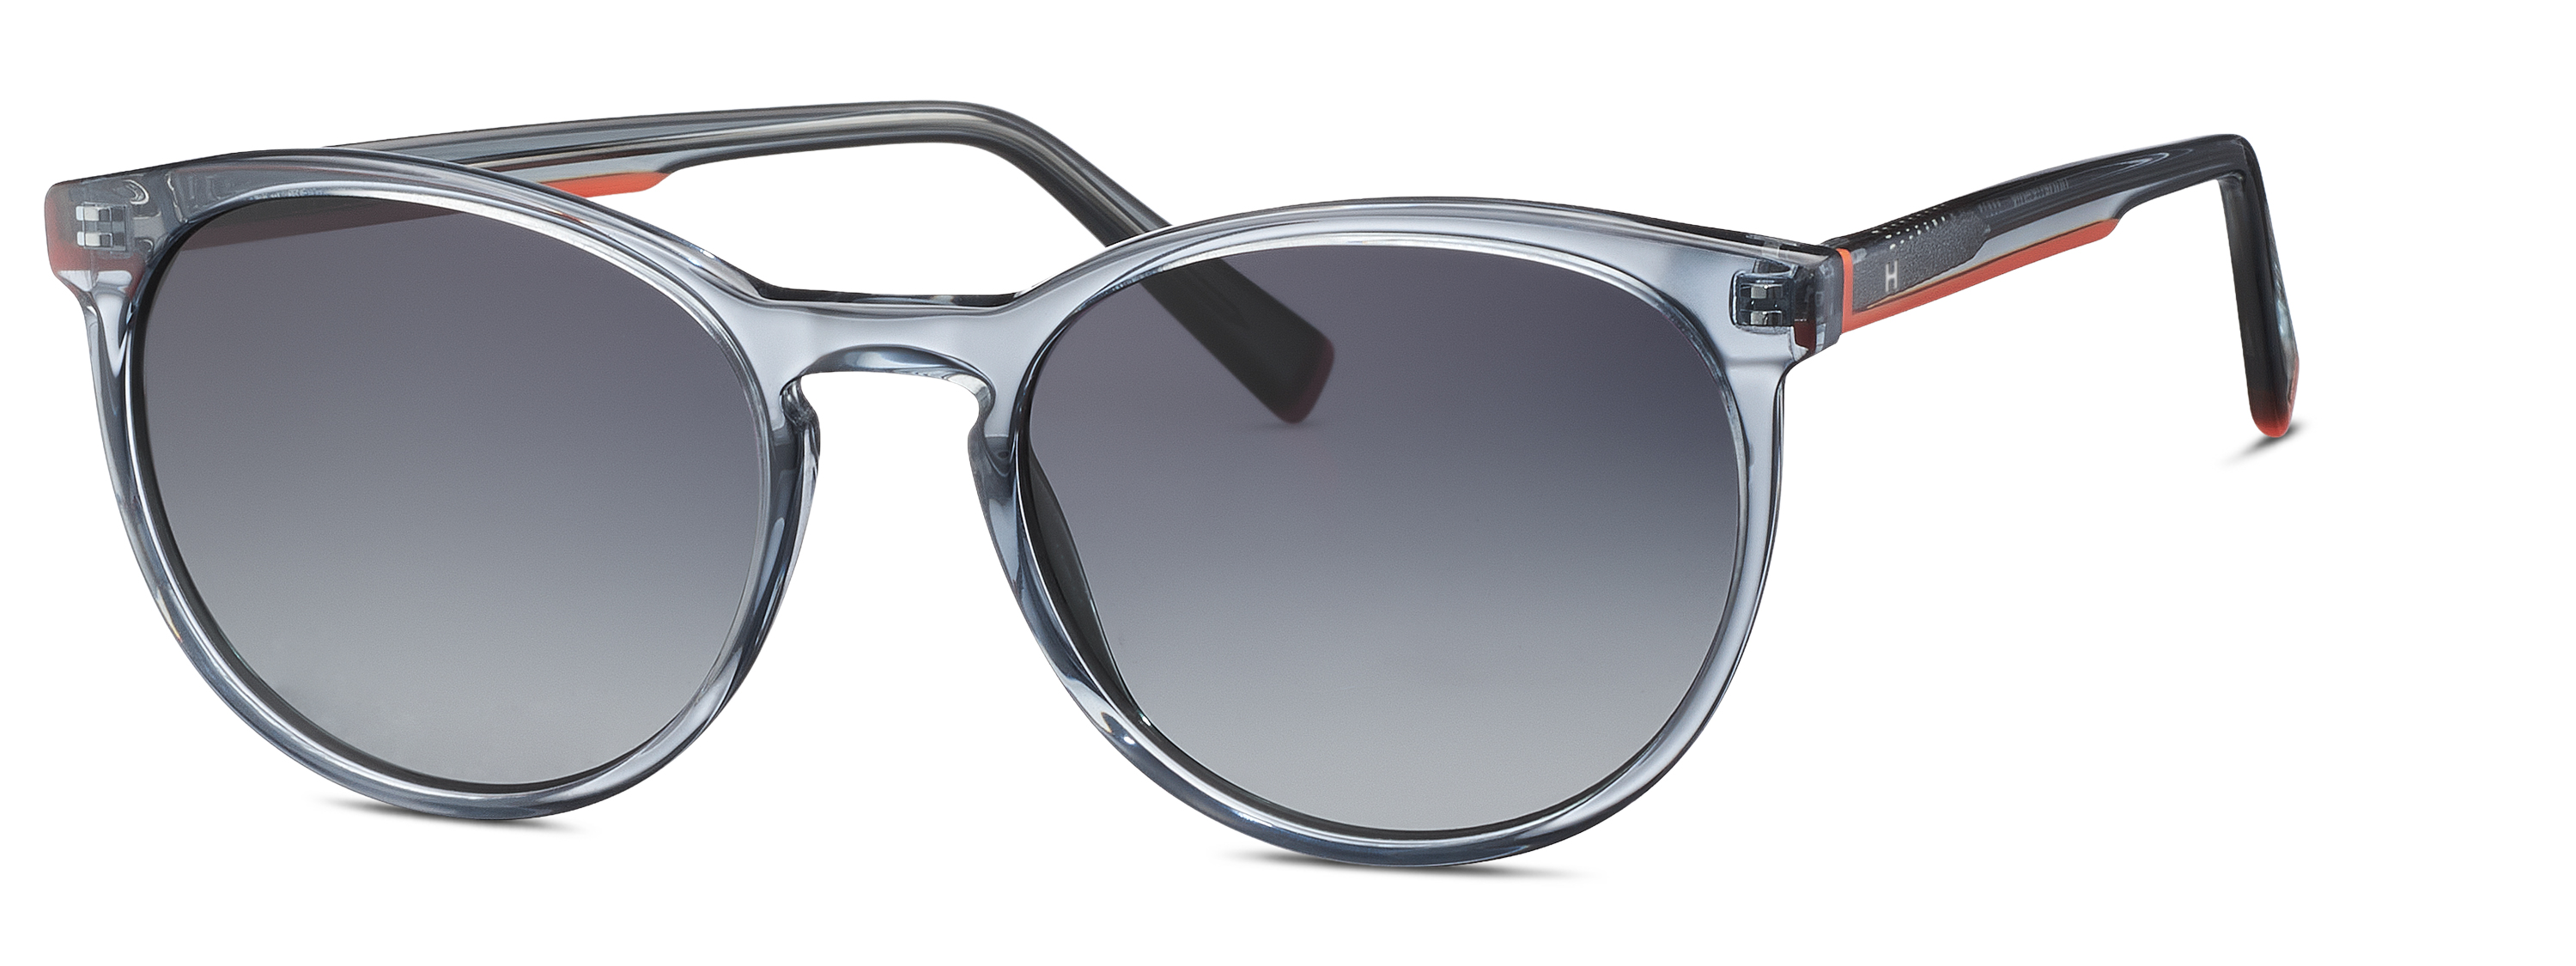 [products.image.front] HUMPHREY´S eyewear 588182 30 Sonnenbrille